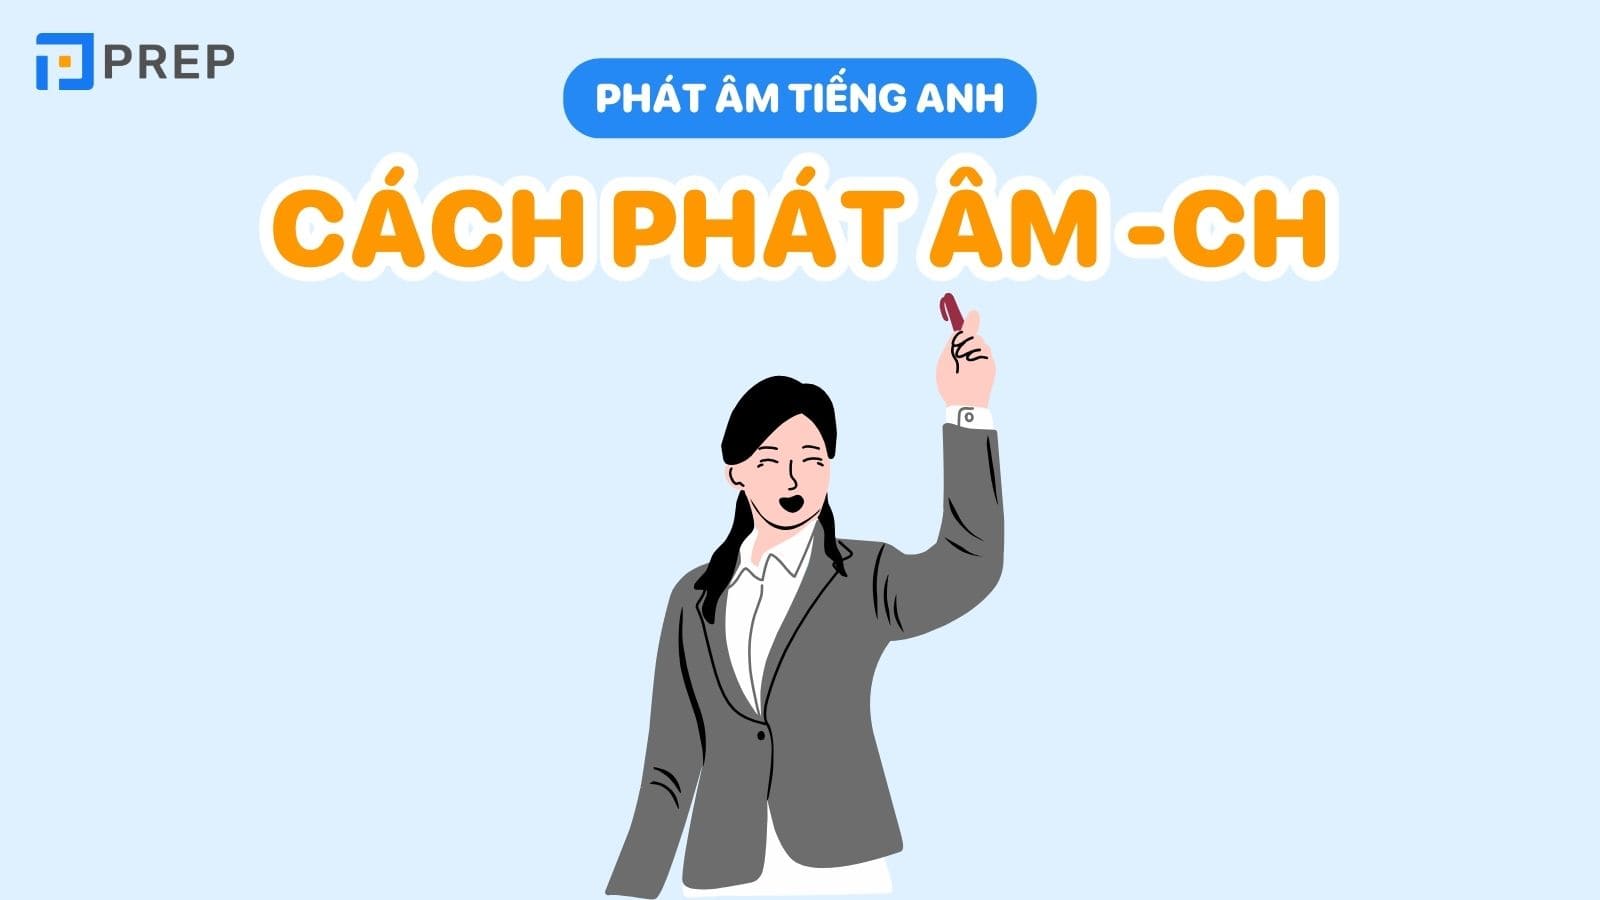 cach-phat-am-ch-trong-tieng-anh.jpg